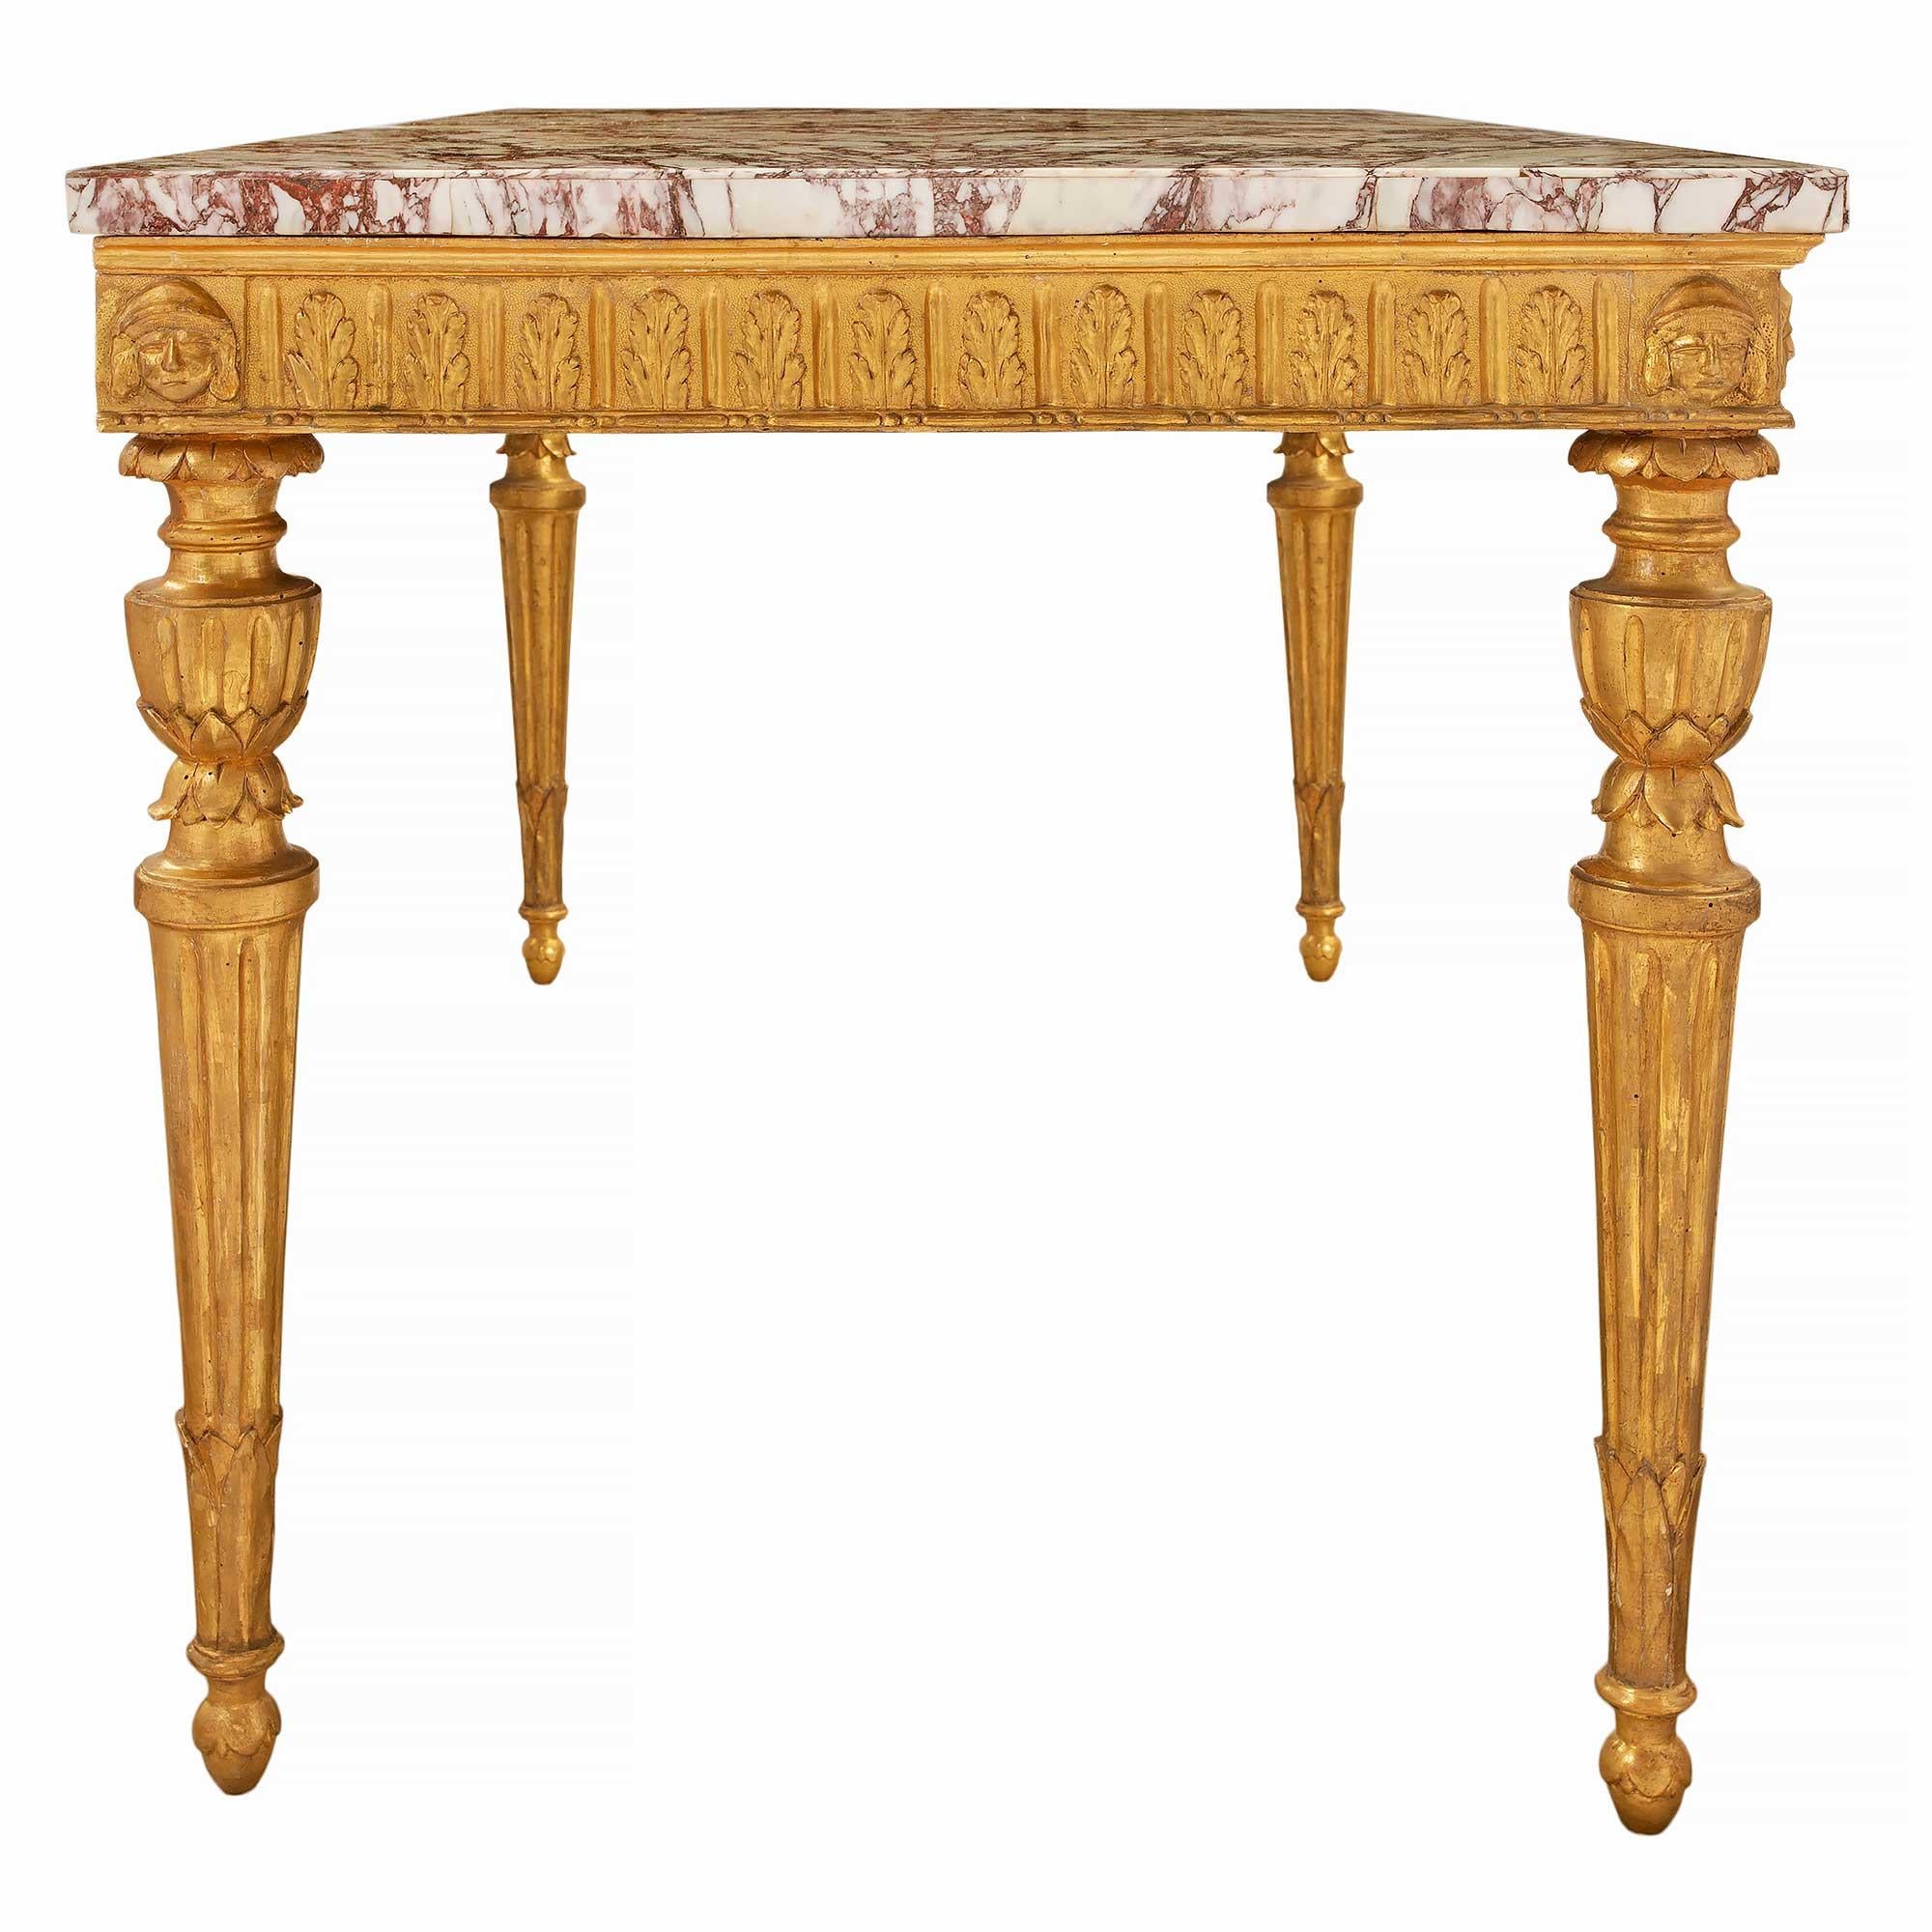 18th Century and Earlier Italian 18th Century Louis XVI Period Giltwood Freestanding Console Table For Sale